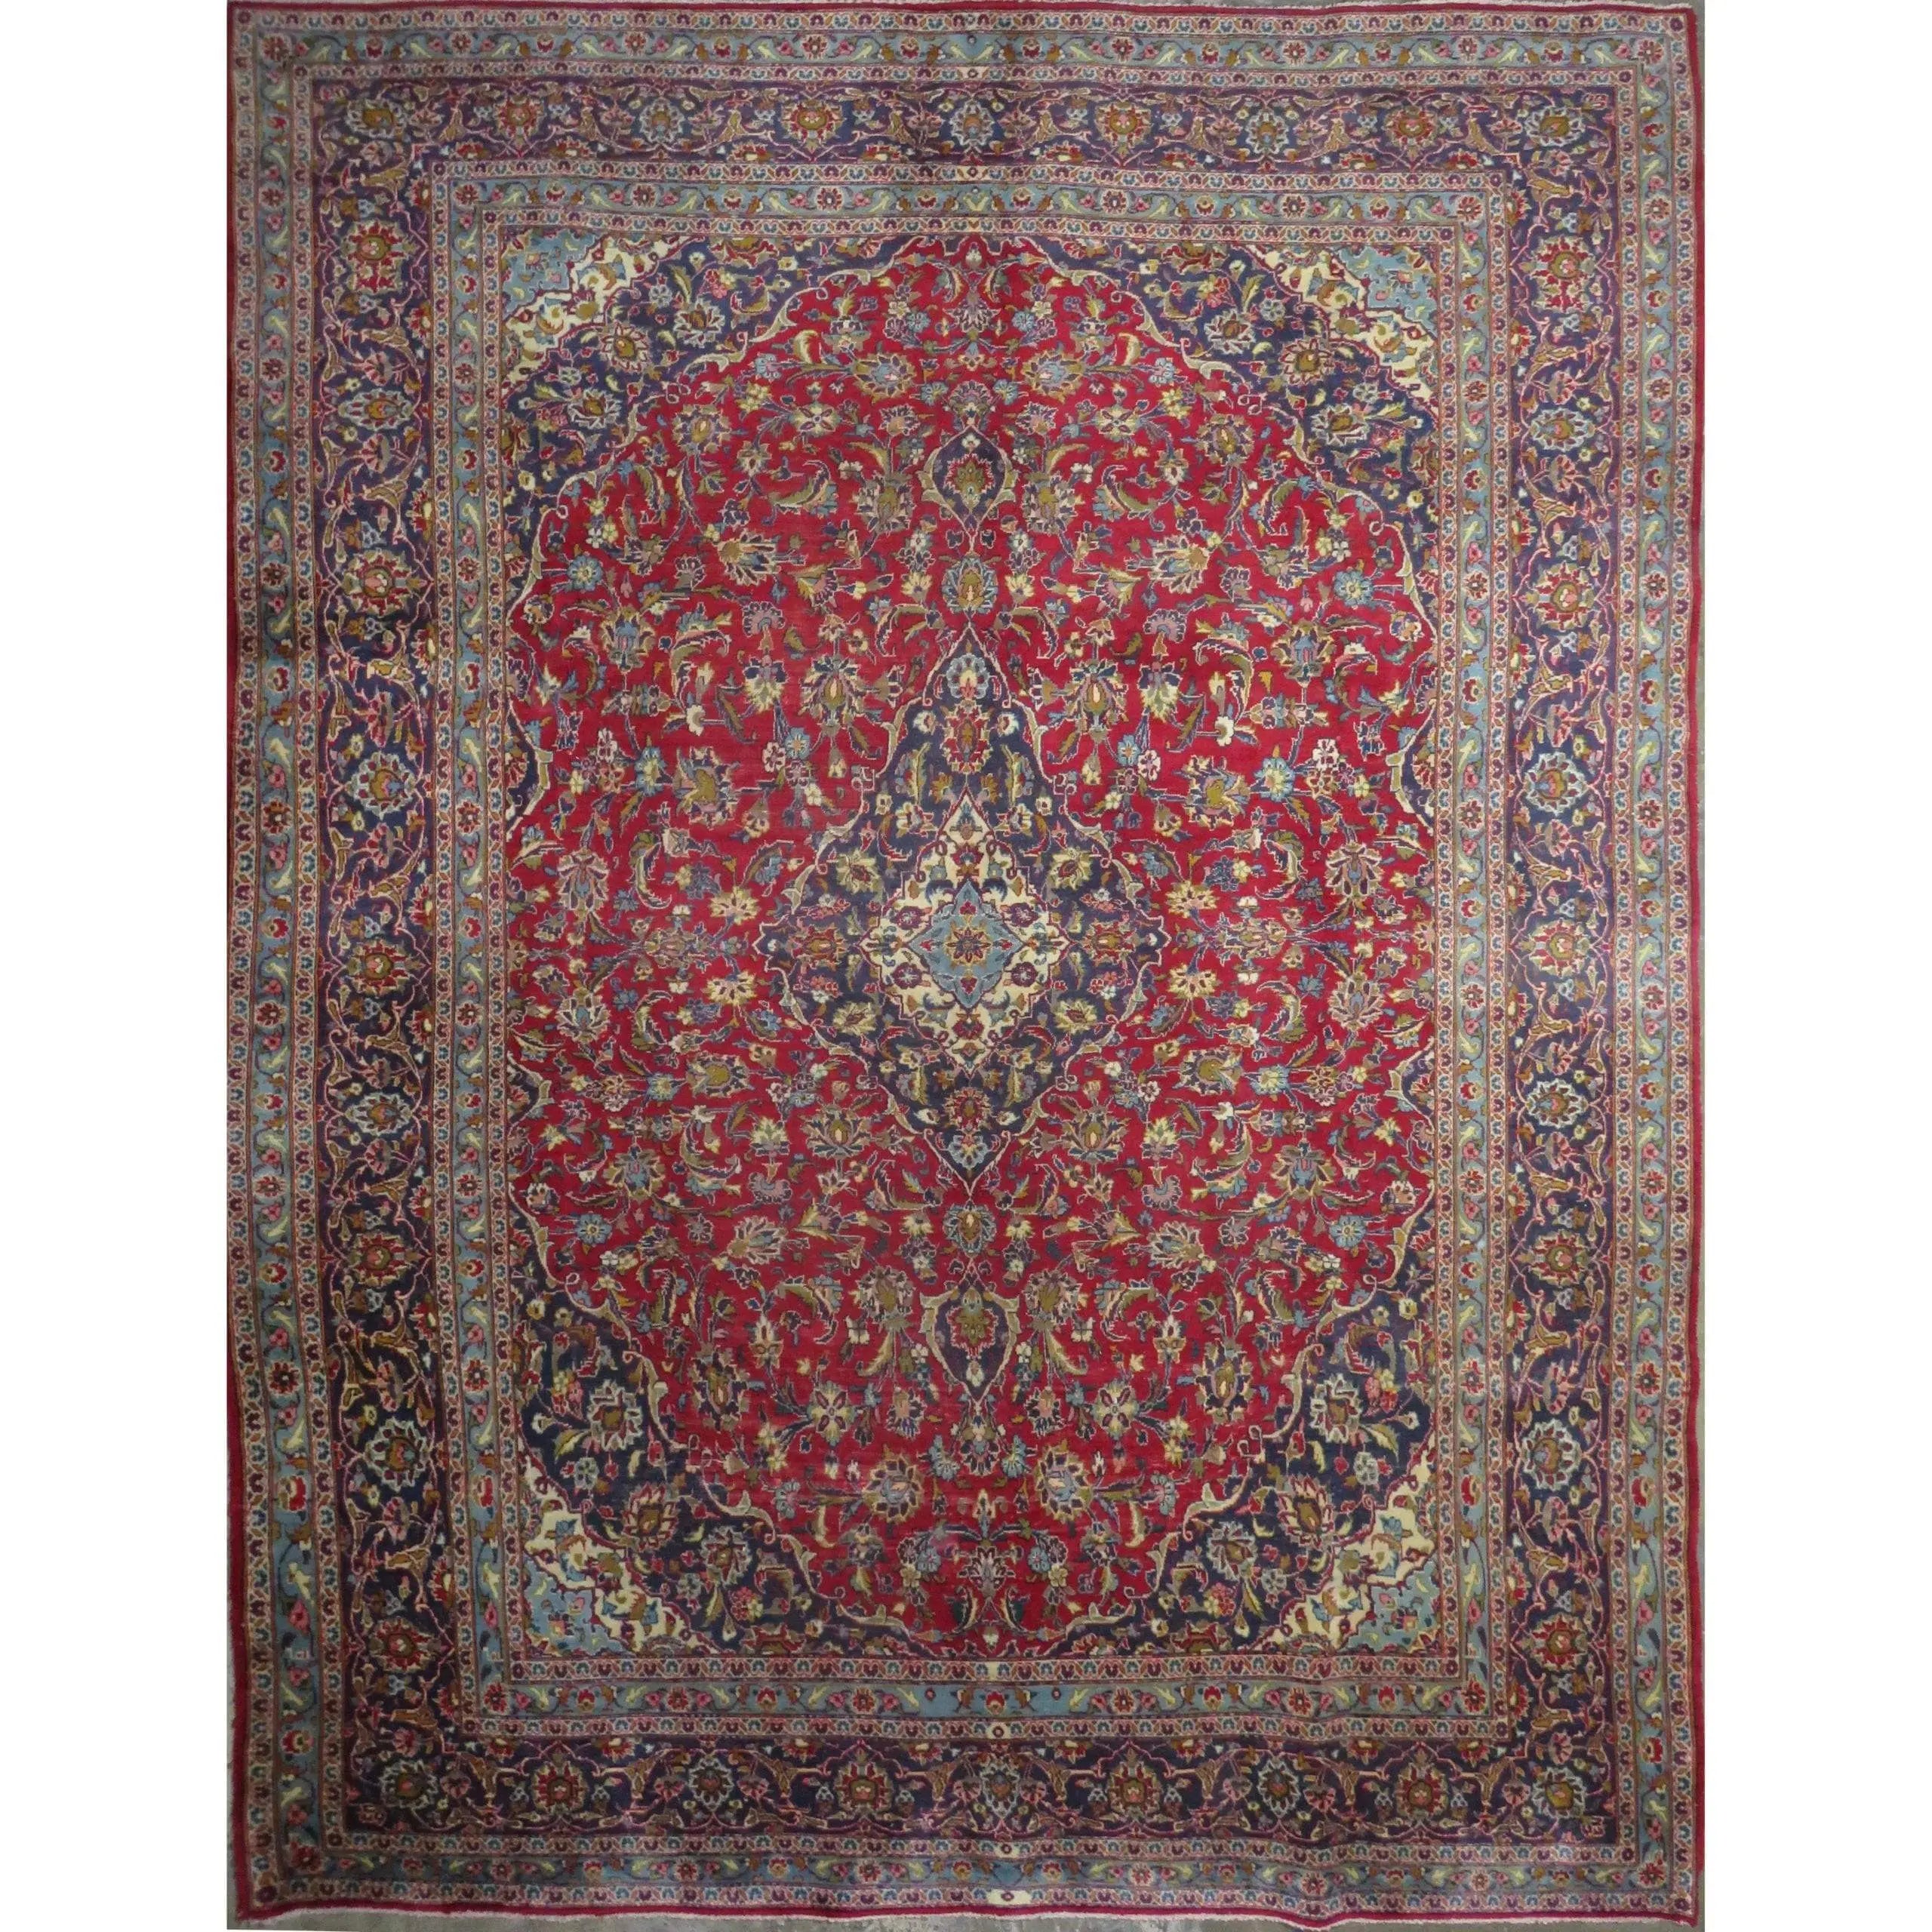 Hand-Knotted Persian Wool Rug _ Luxurious Vintage Design, 12'4" X 9'3", Artisan Crafted